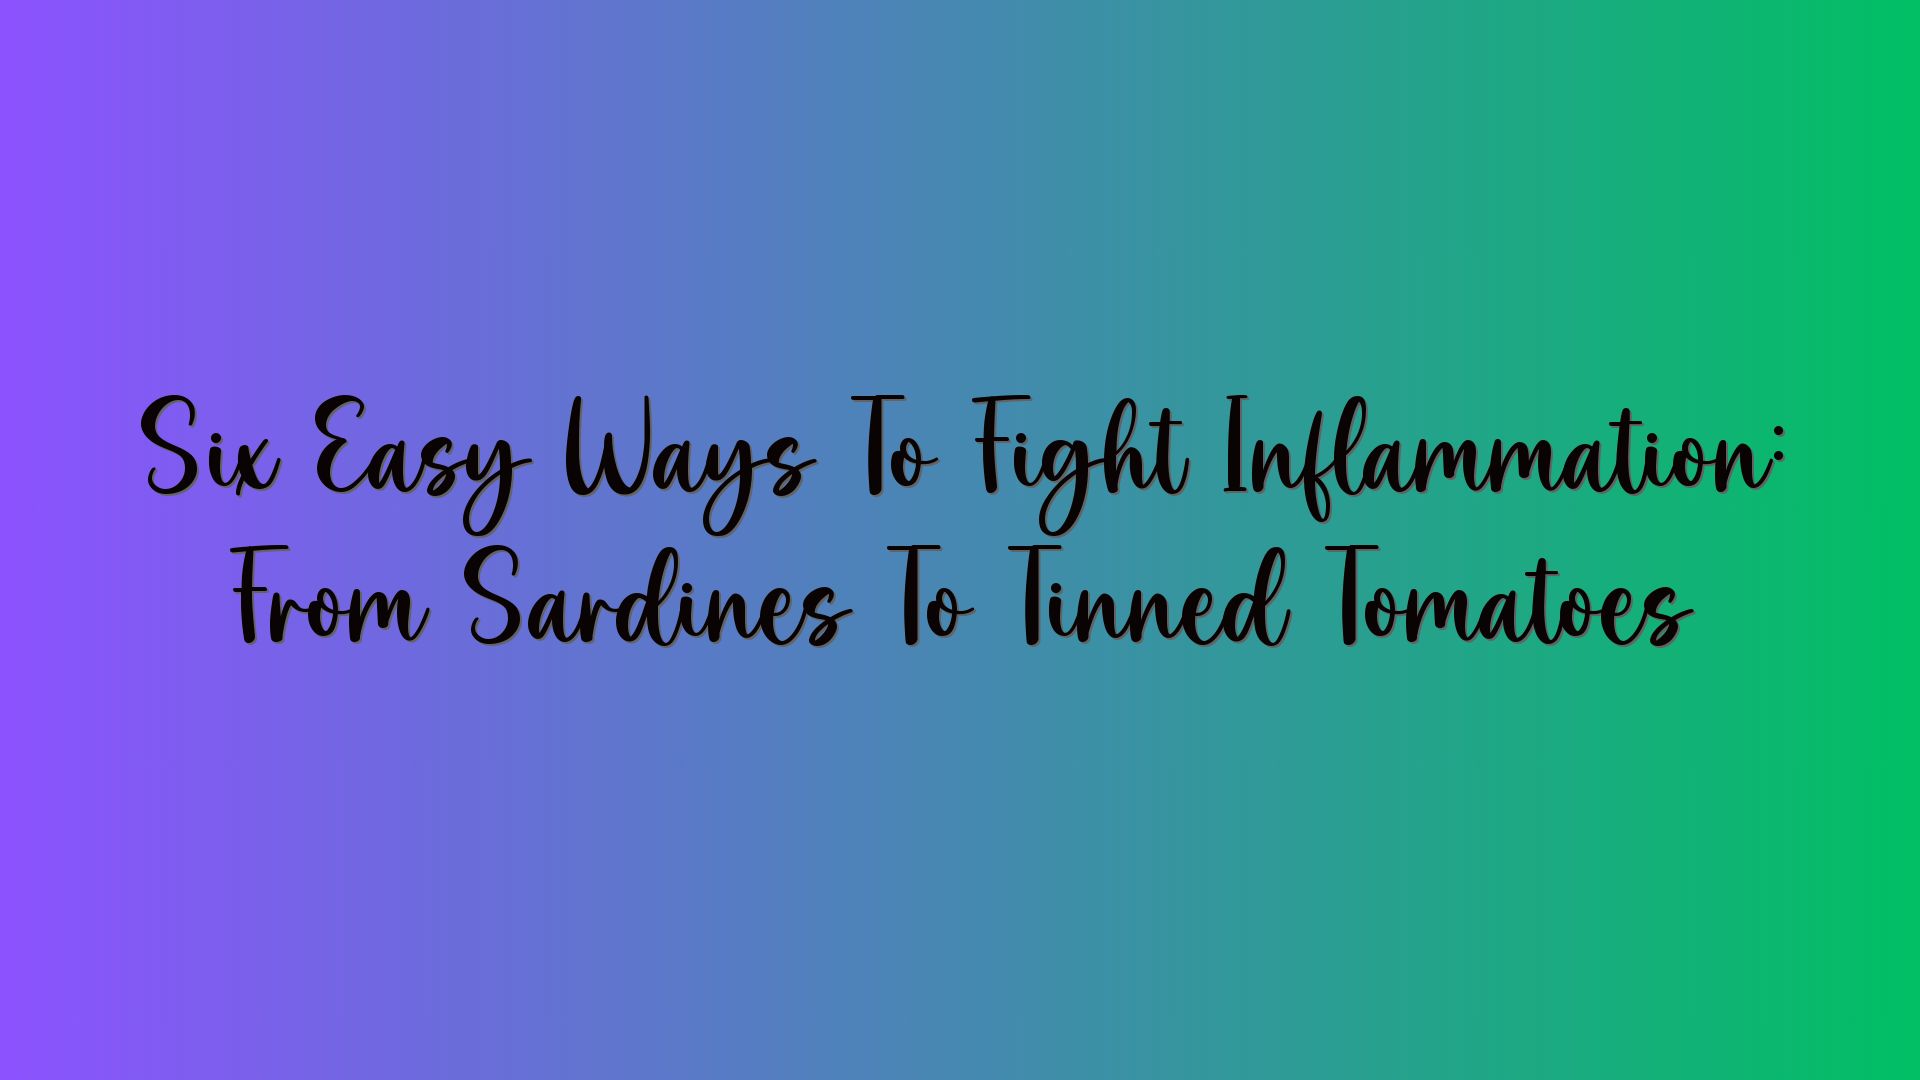 Six Easy Ways To Fight Inflammation: From Sardines To Tinned Tomatoes